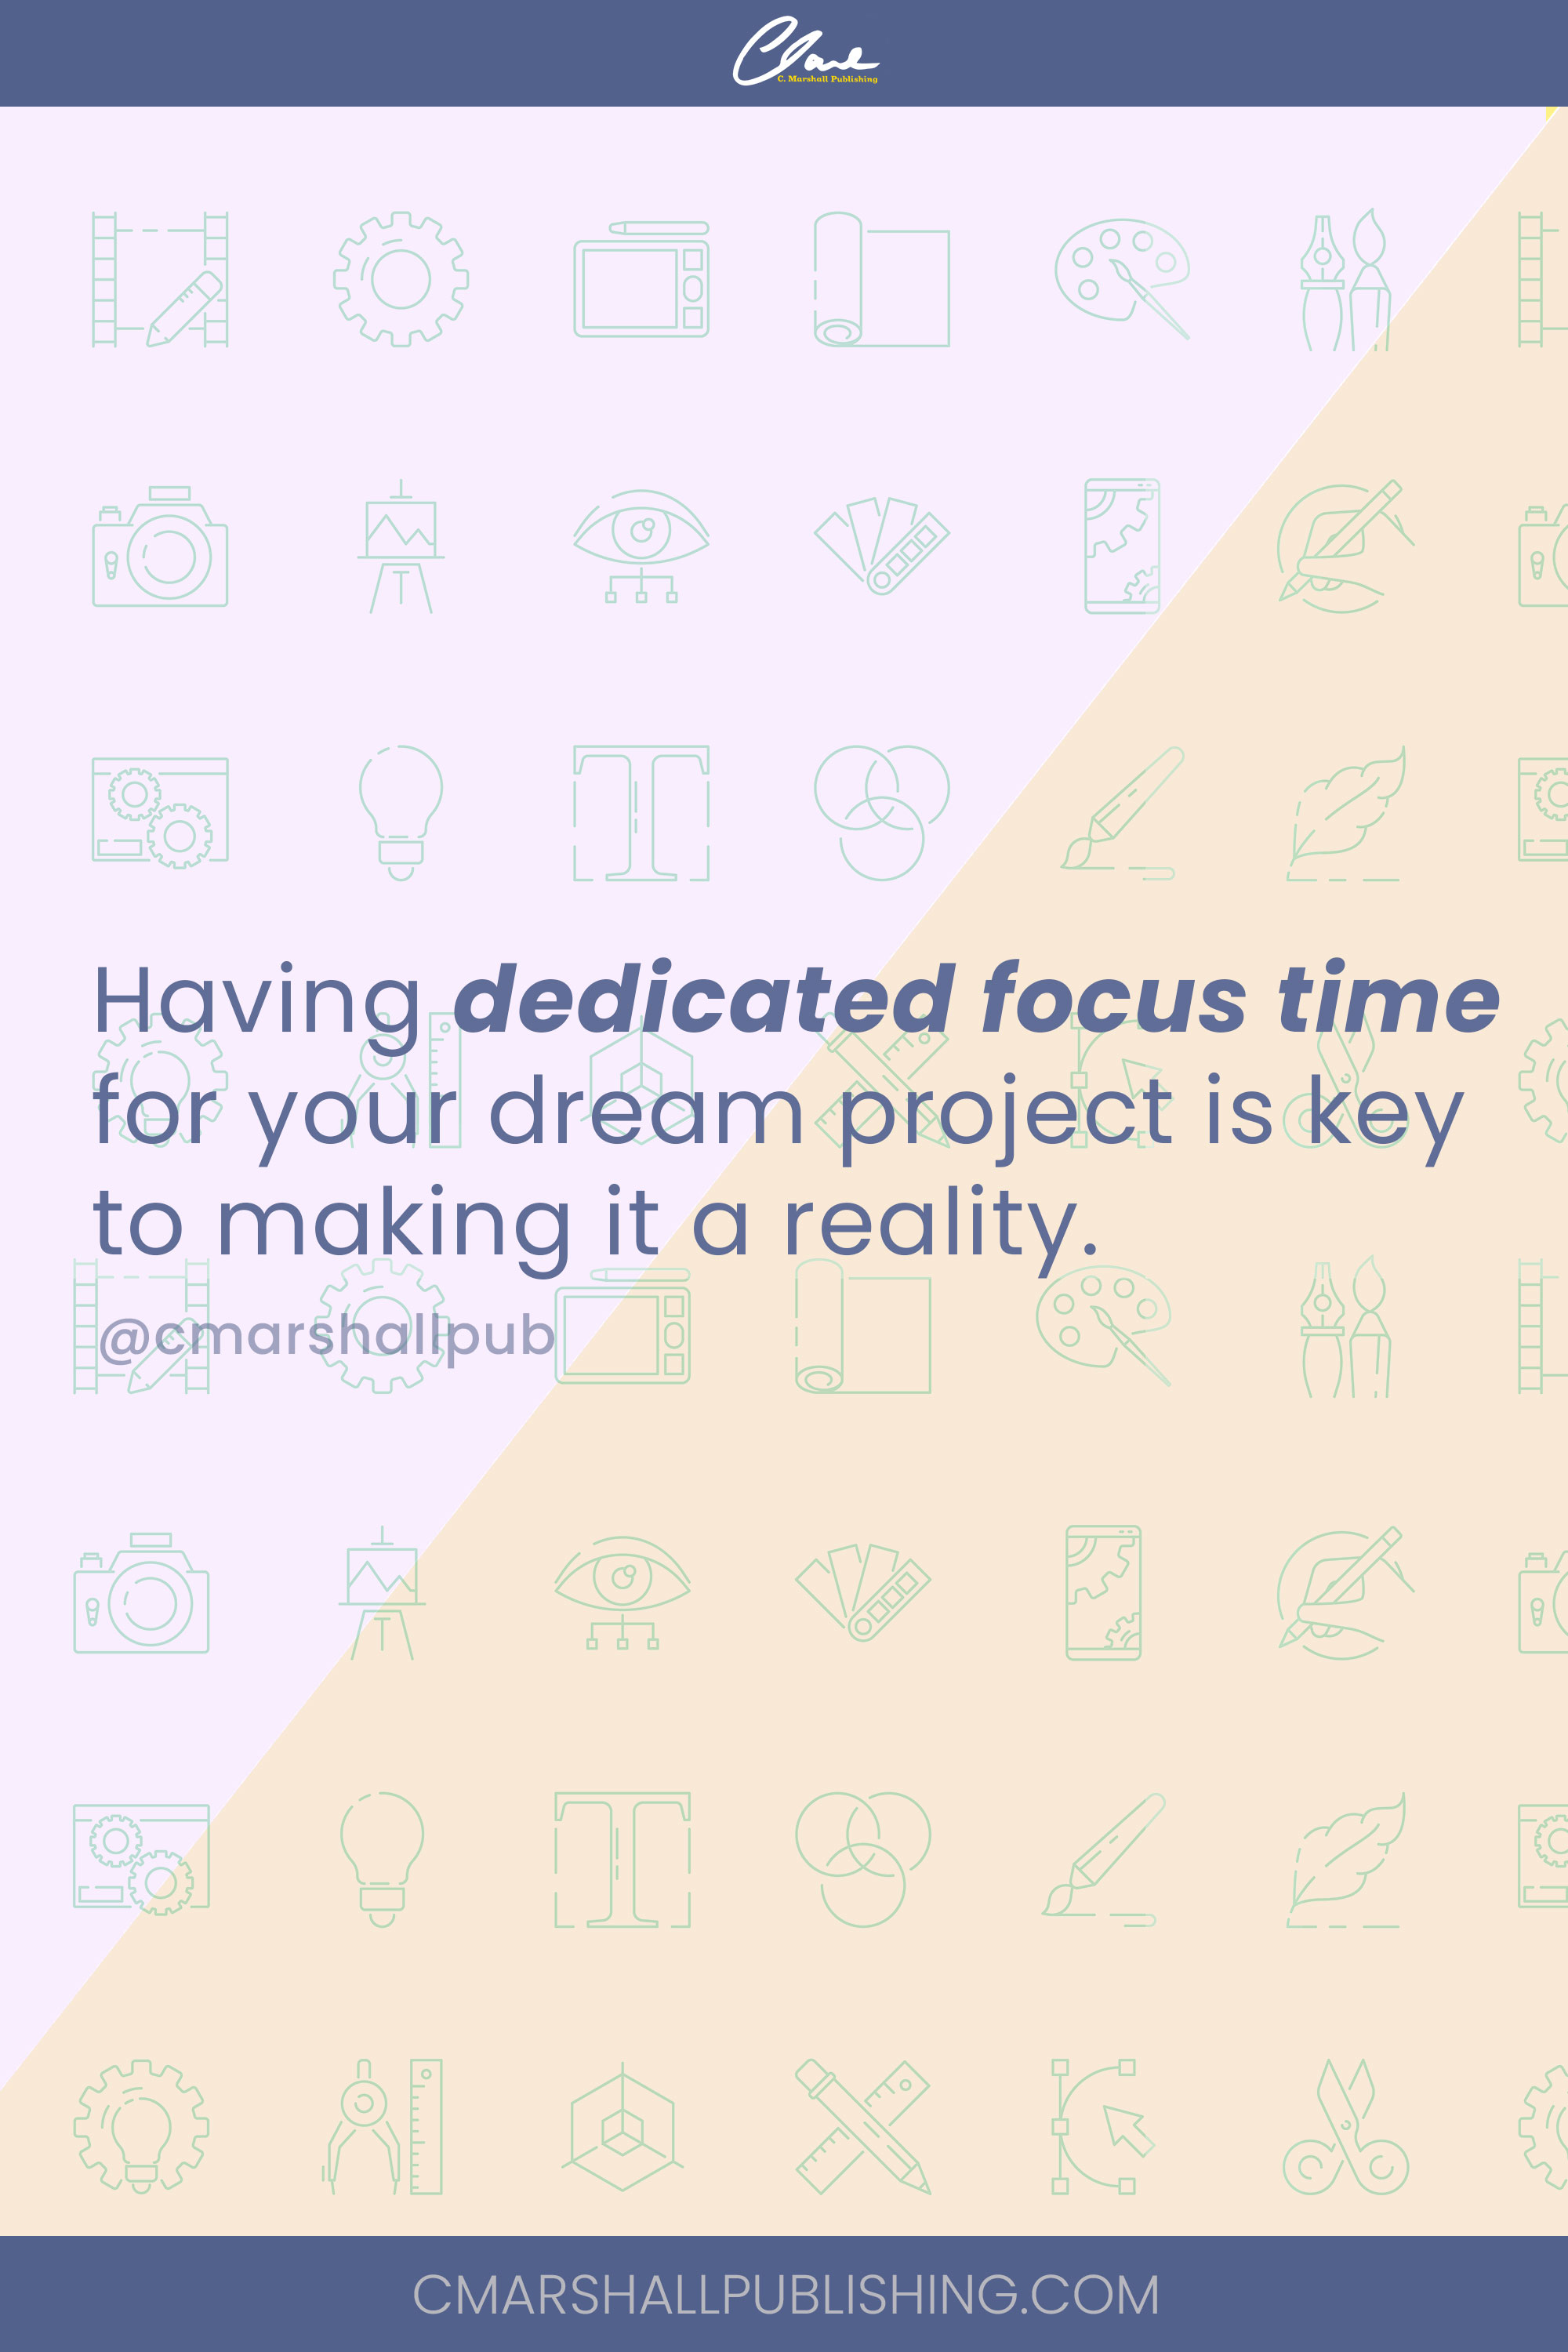 Having dedicated focus time for your dream project is key to making it a reality